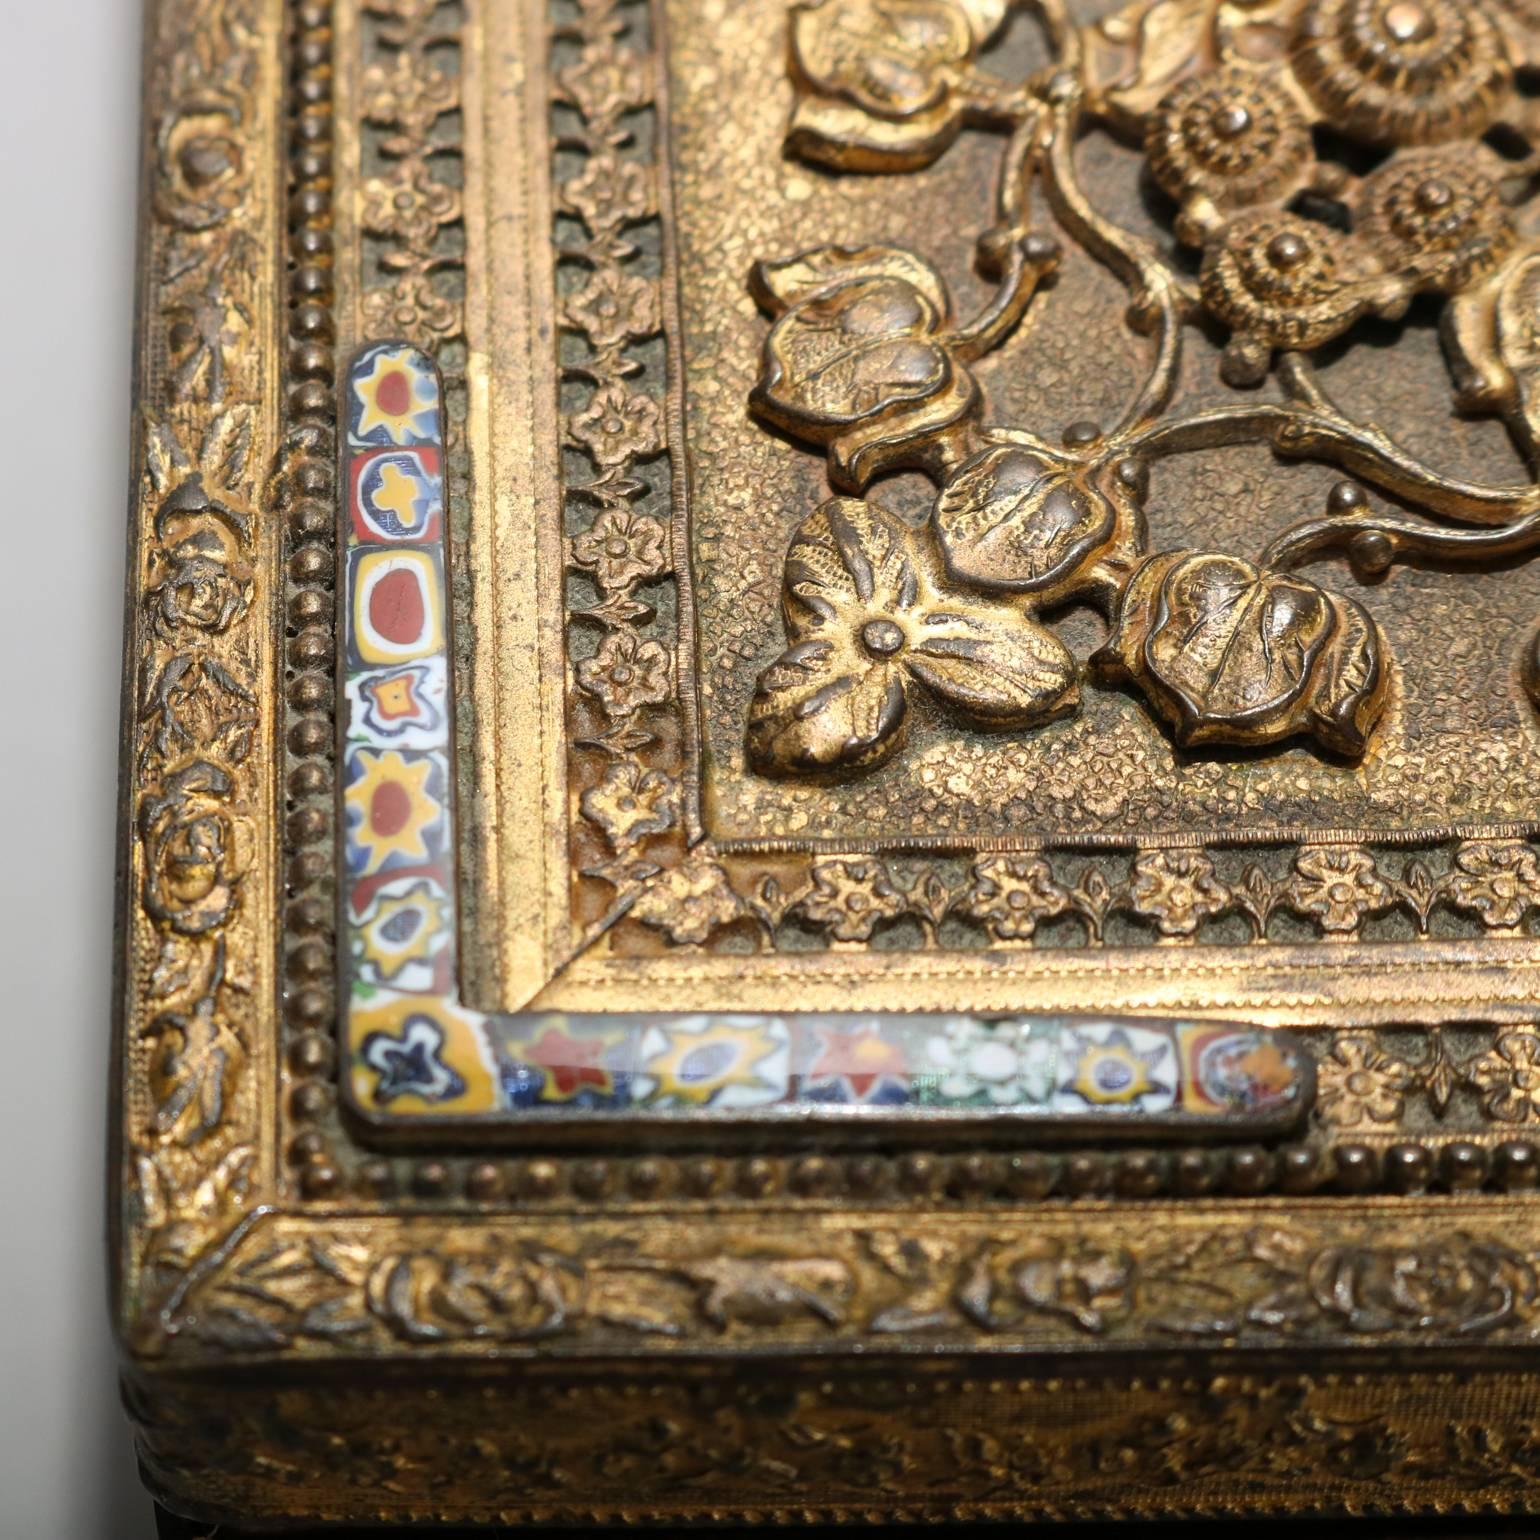 19th Century Antique Gilt Metal Jeweled Bible Box with the Holy Family by E. & J.B. Empire